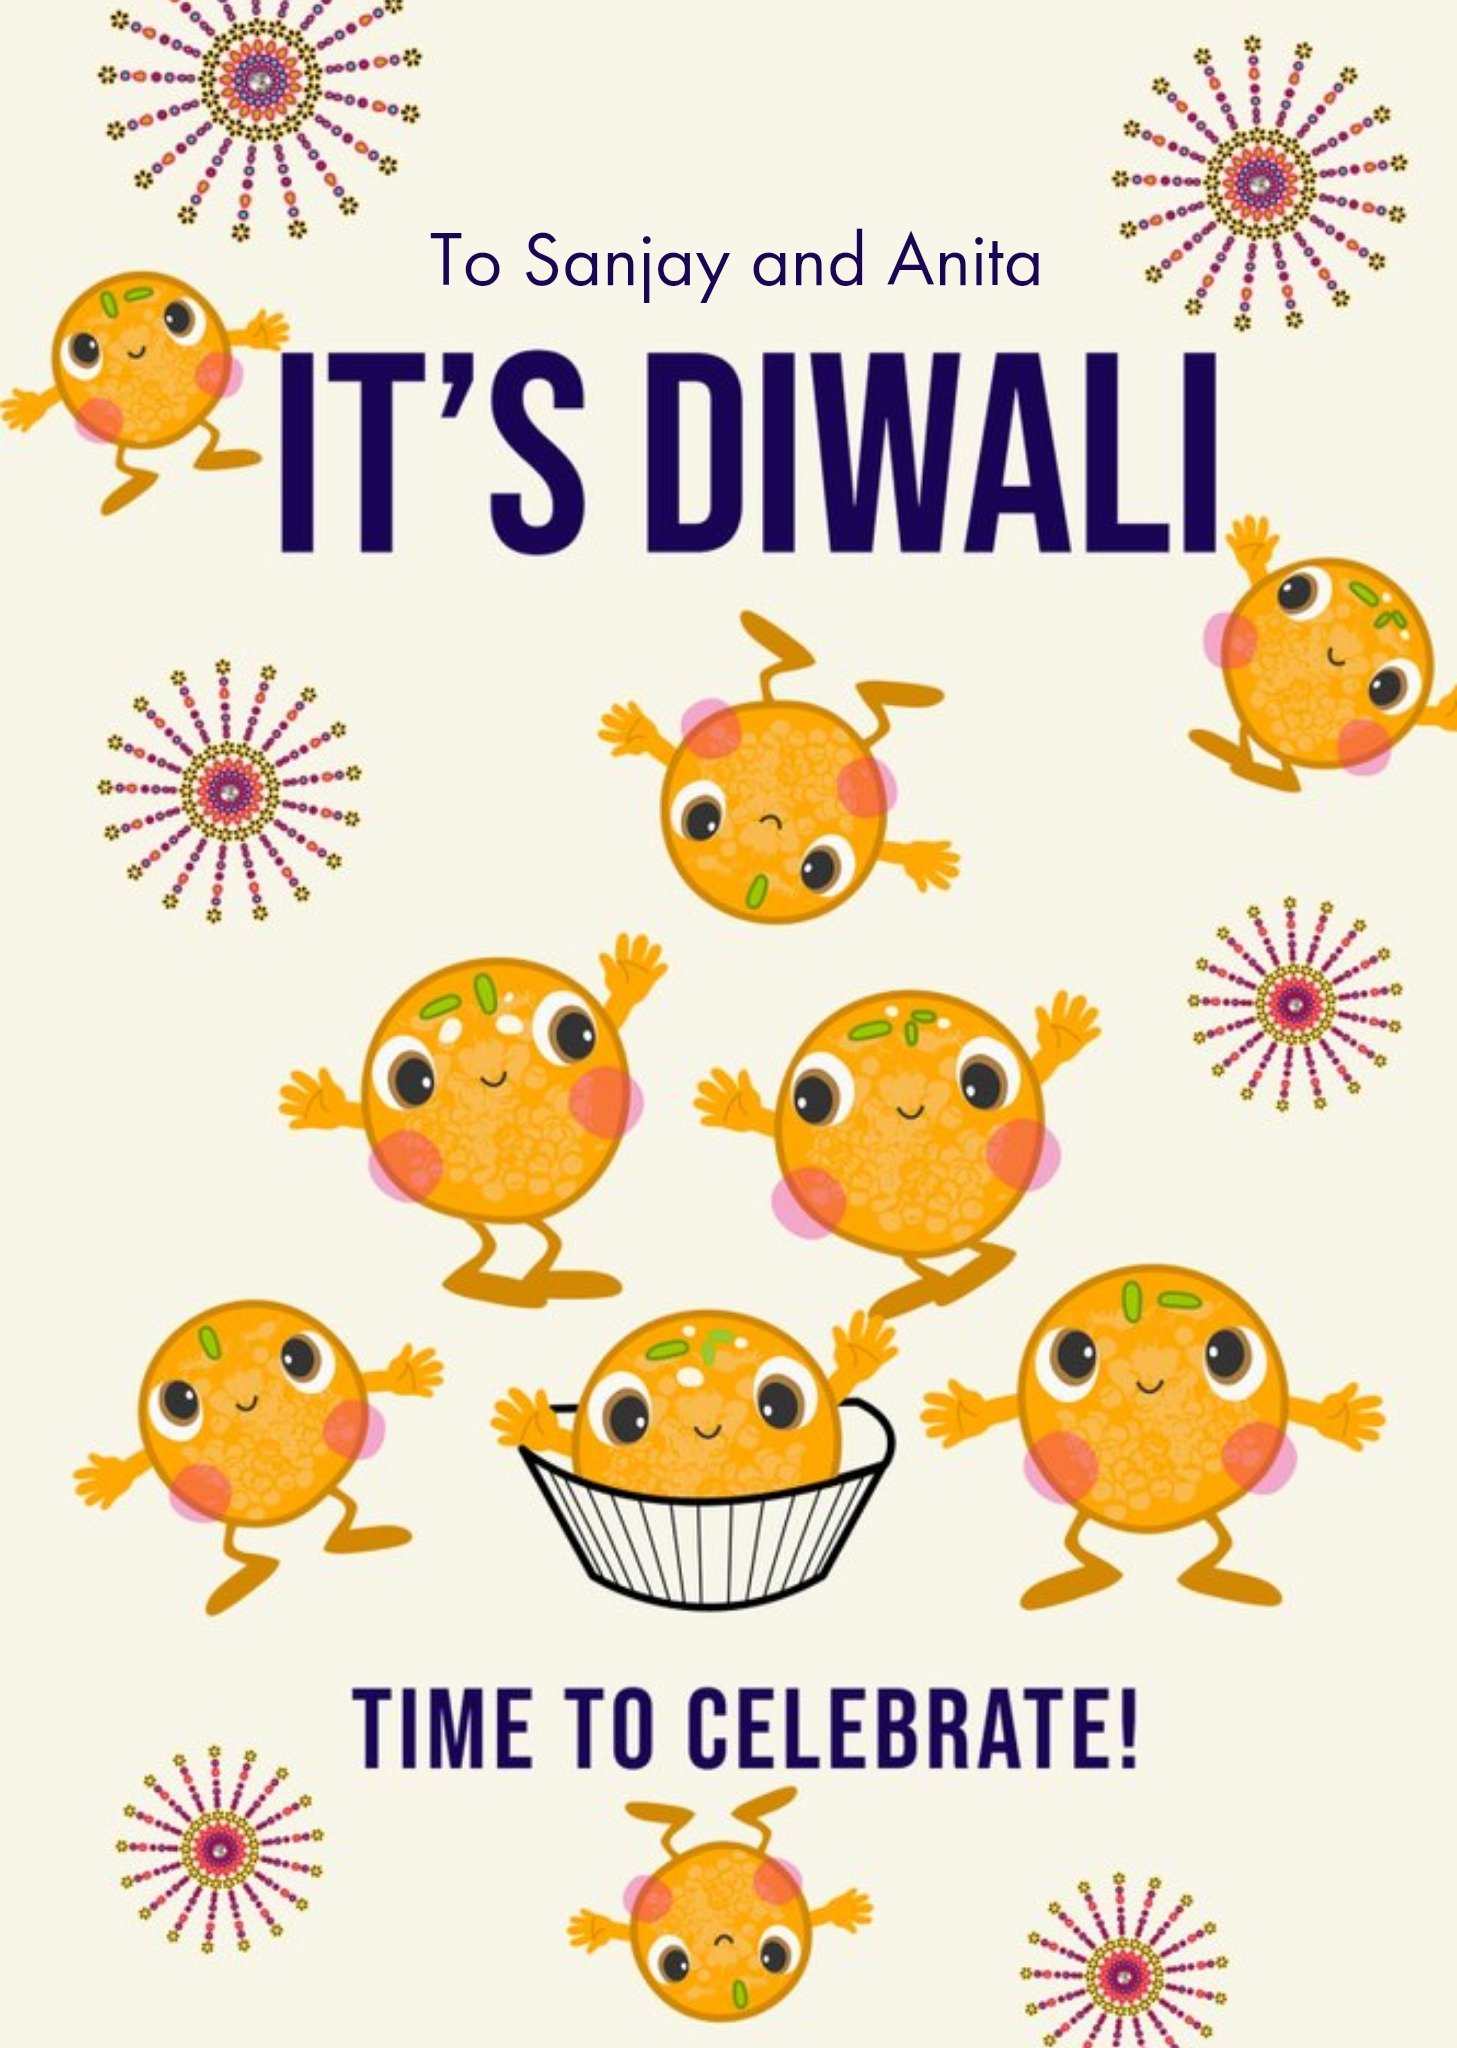 Moonpig Bright Graphic Diwali Sweets And Mandalas. It's Diwali Time To Celebrate Card Ecard